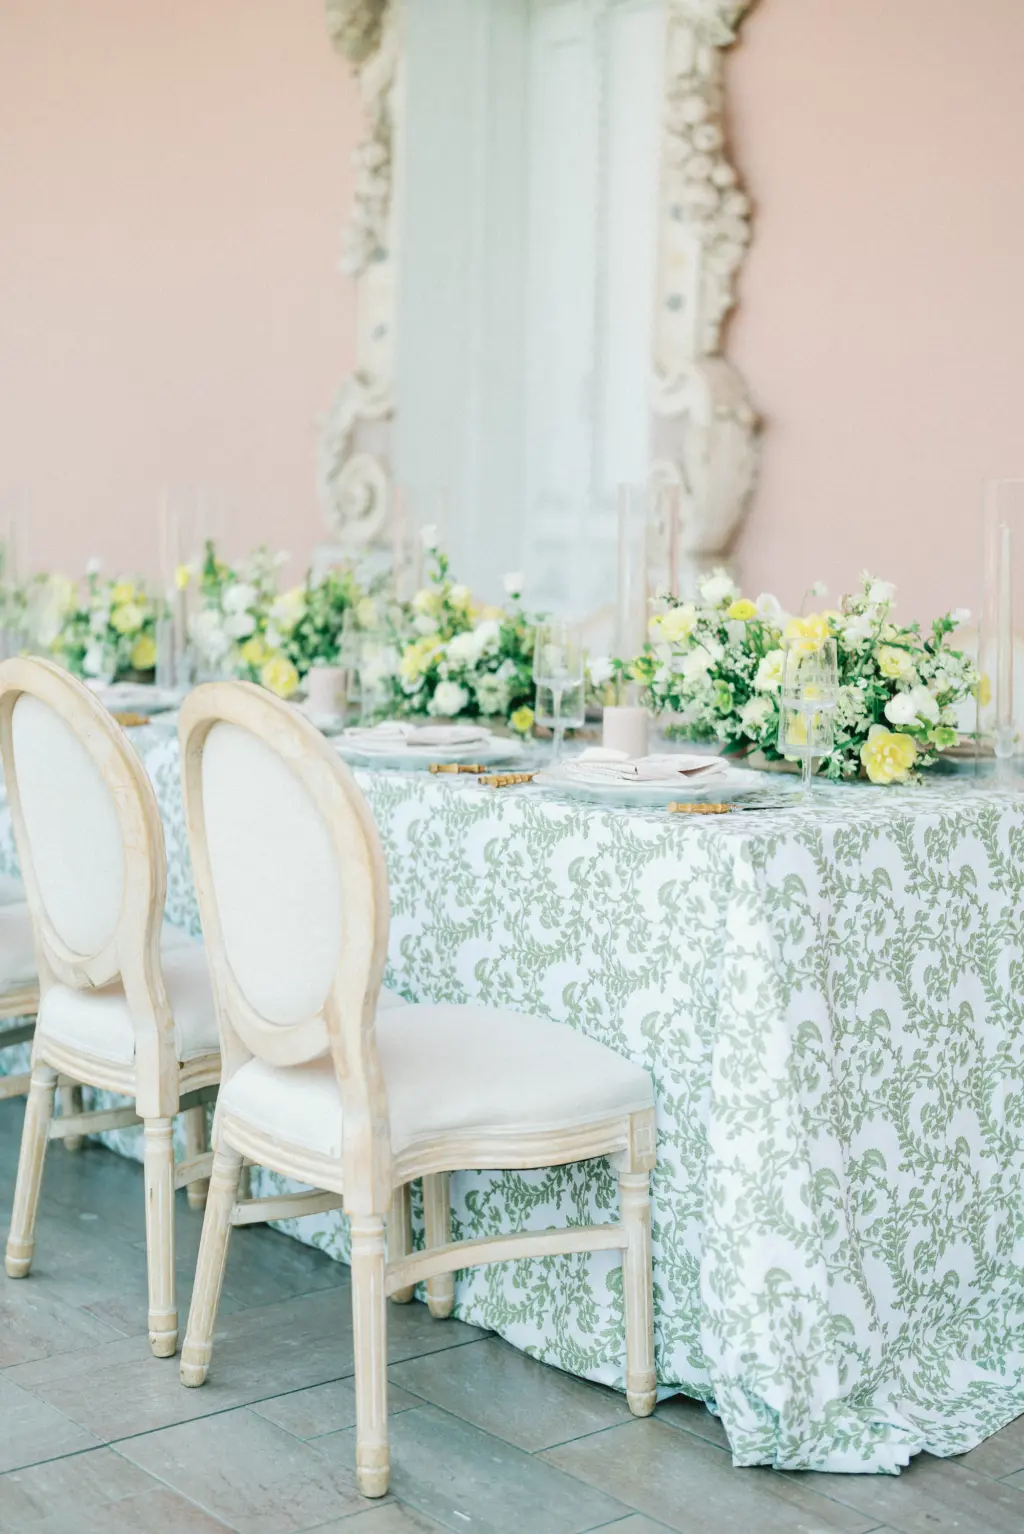 Summer Italian Damask Pattern Tablecloth Linen with Whitewash Louis Chairs and White and Pink Rose Flower Wedding Reception Centerpiece Decor Inspiration